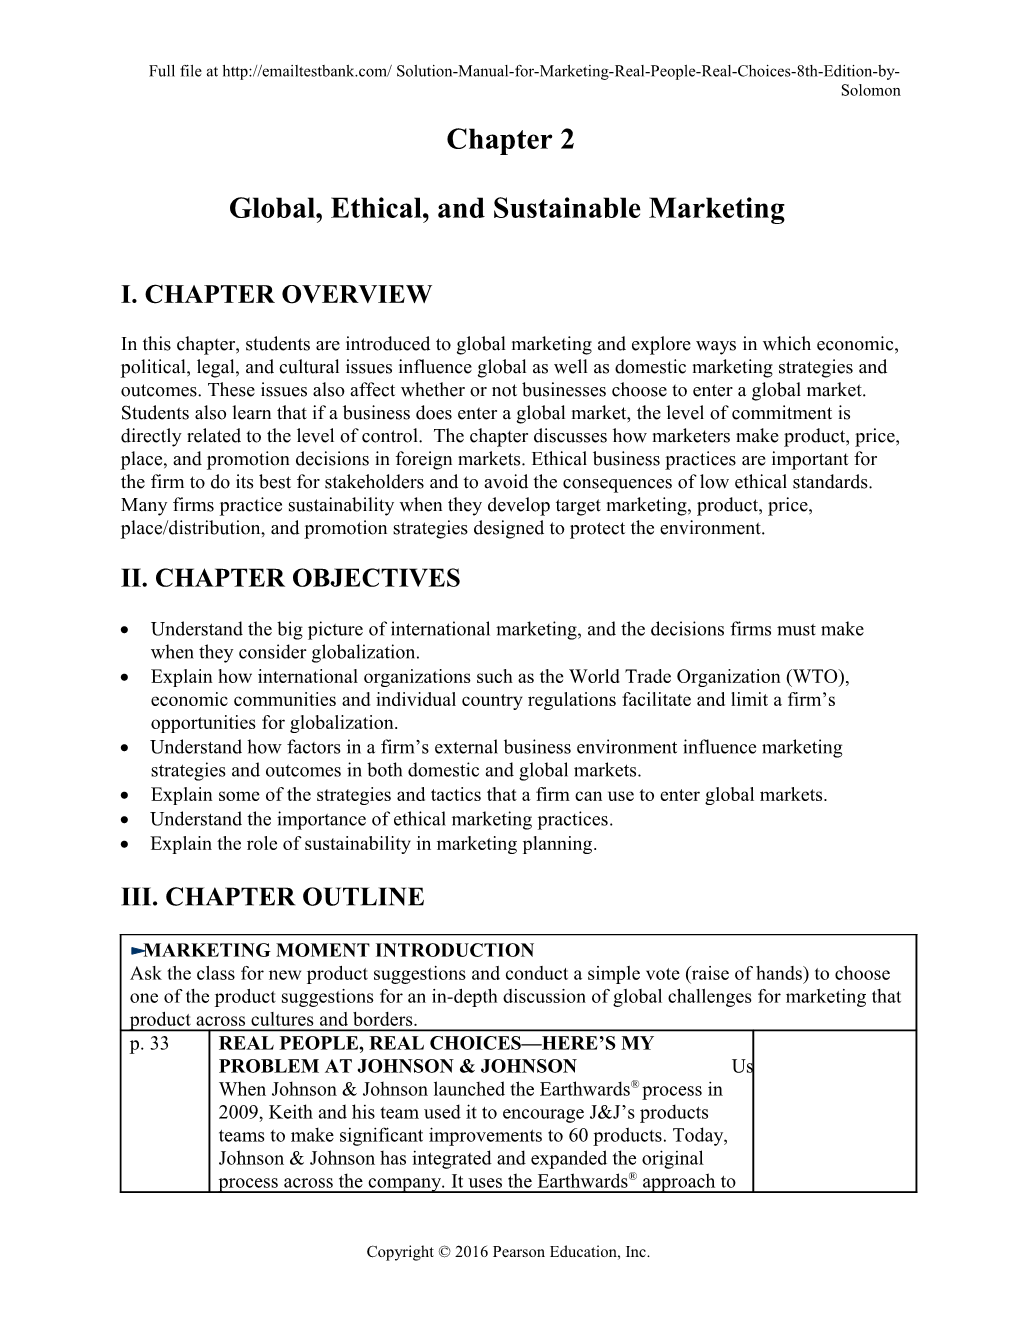 Global, Ethical, and Sustainable Marketing